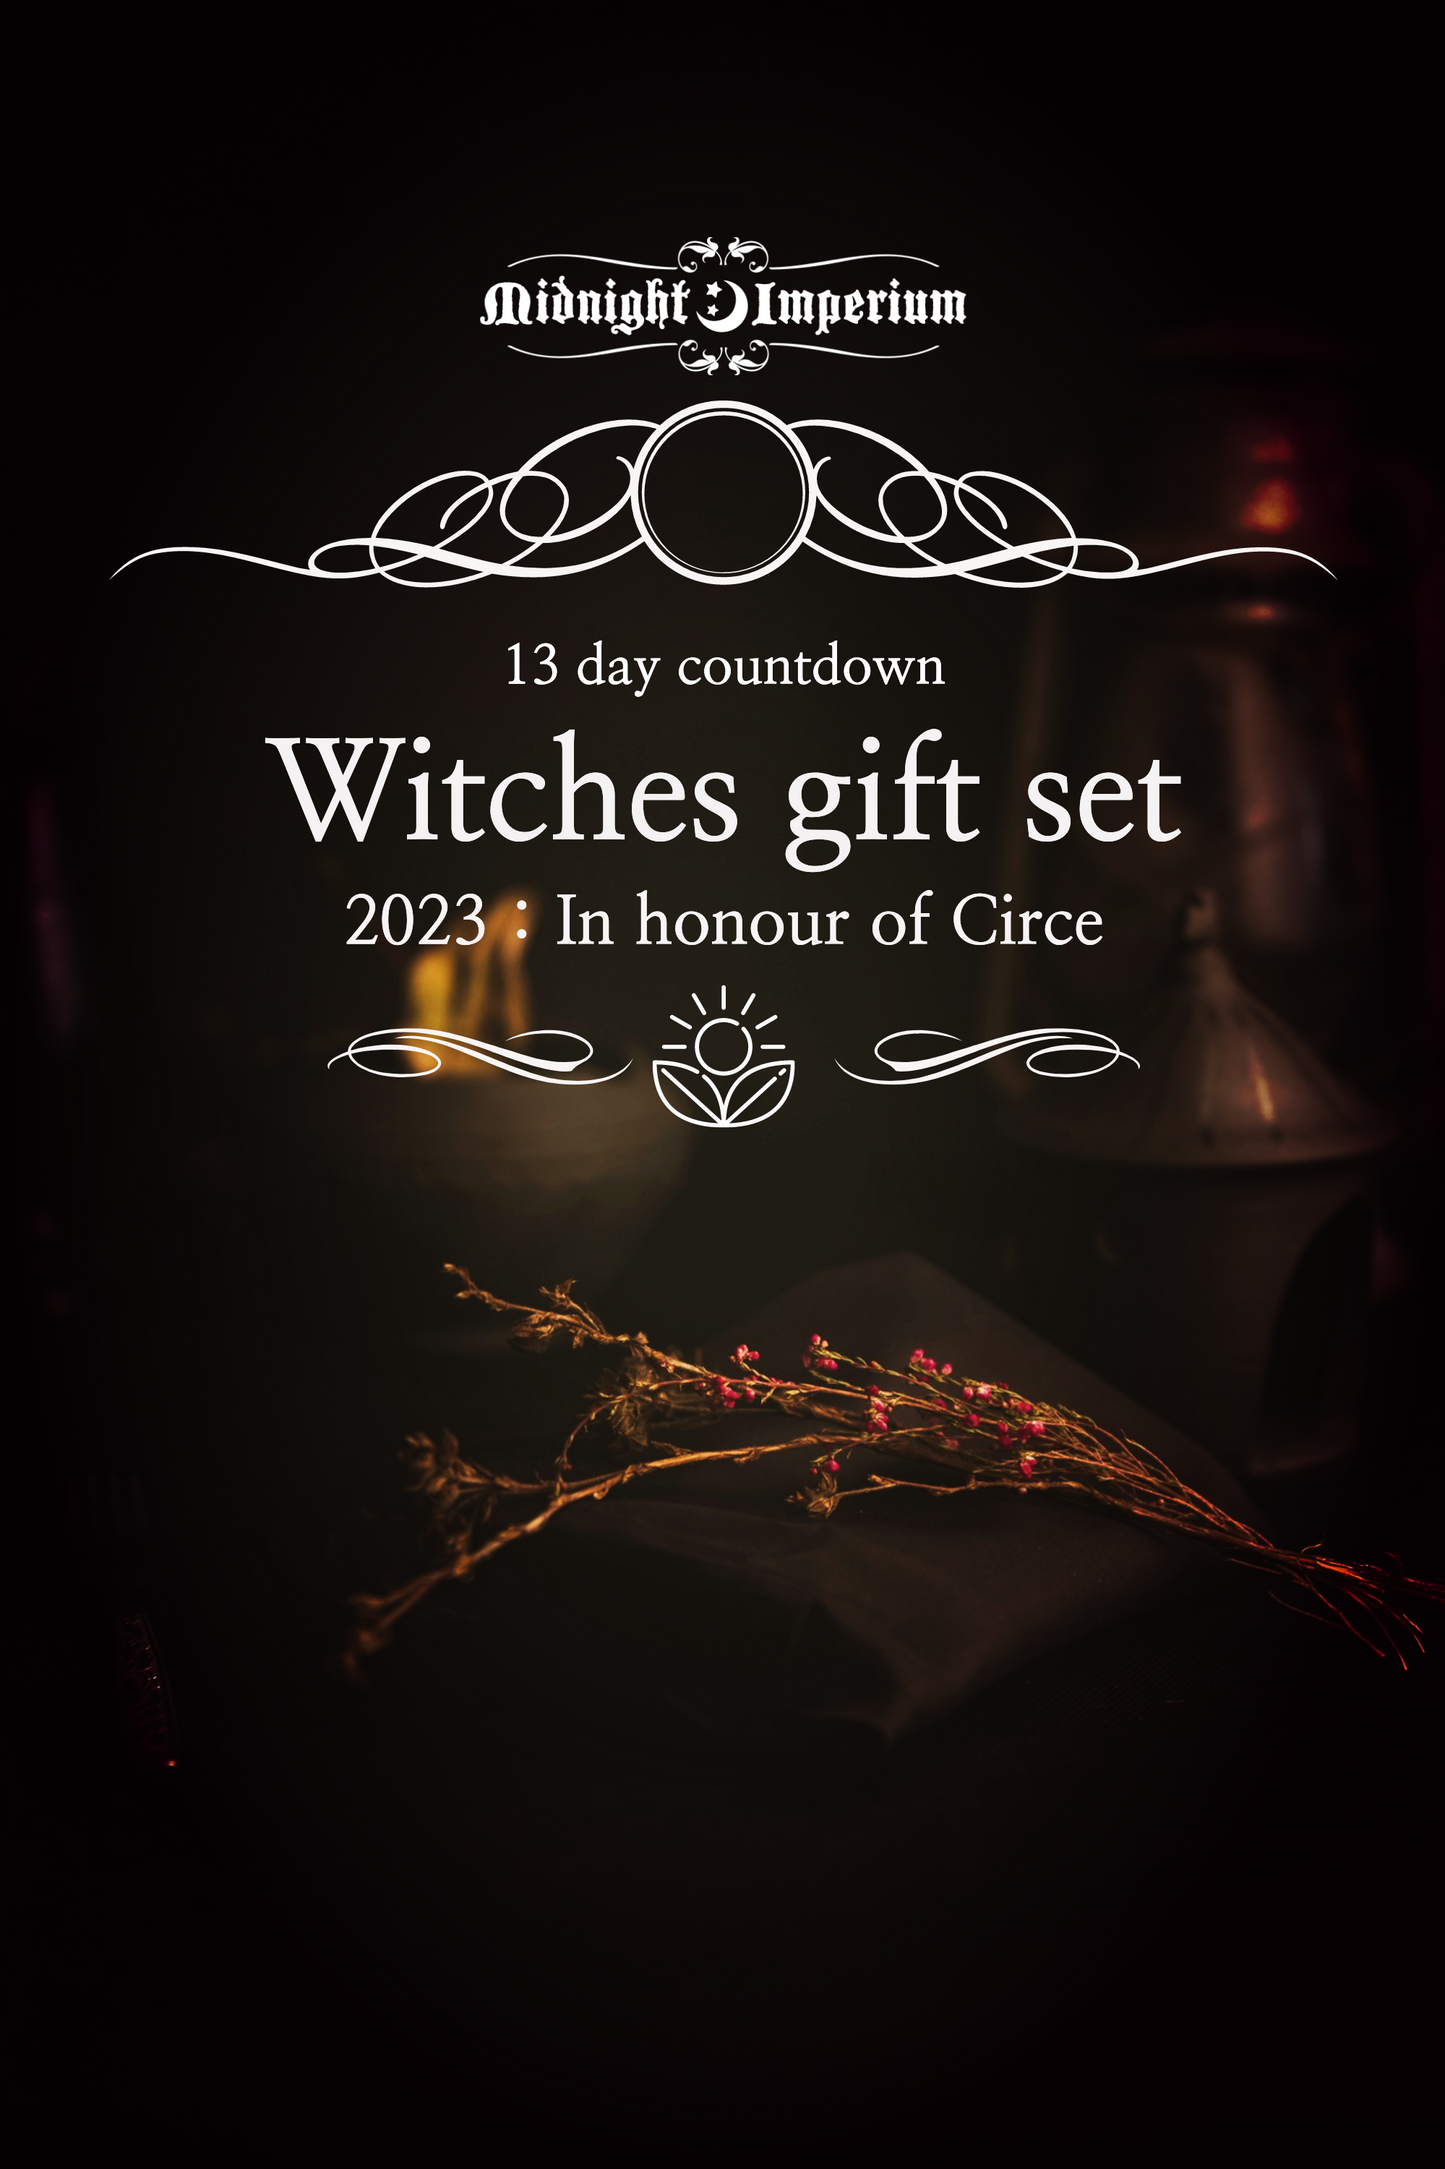 Witches gift set - Circe